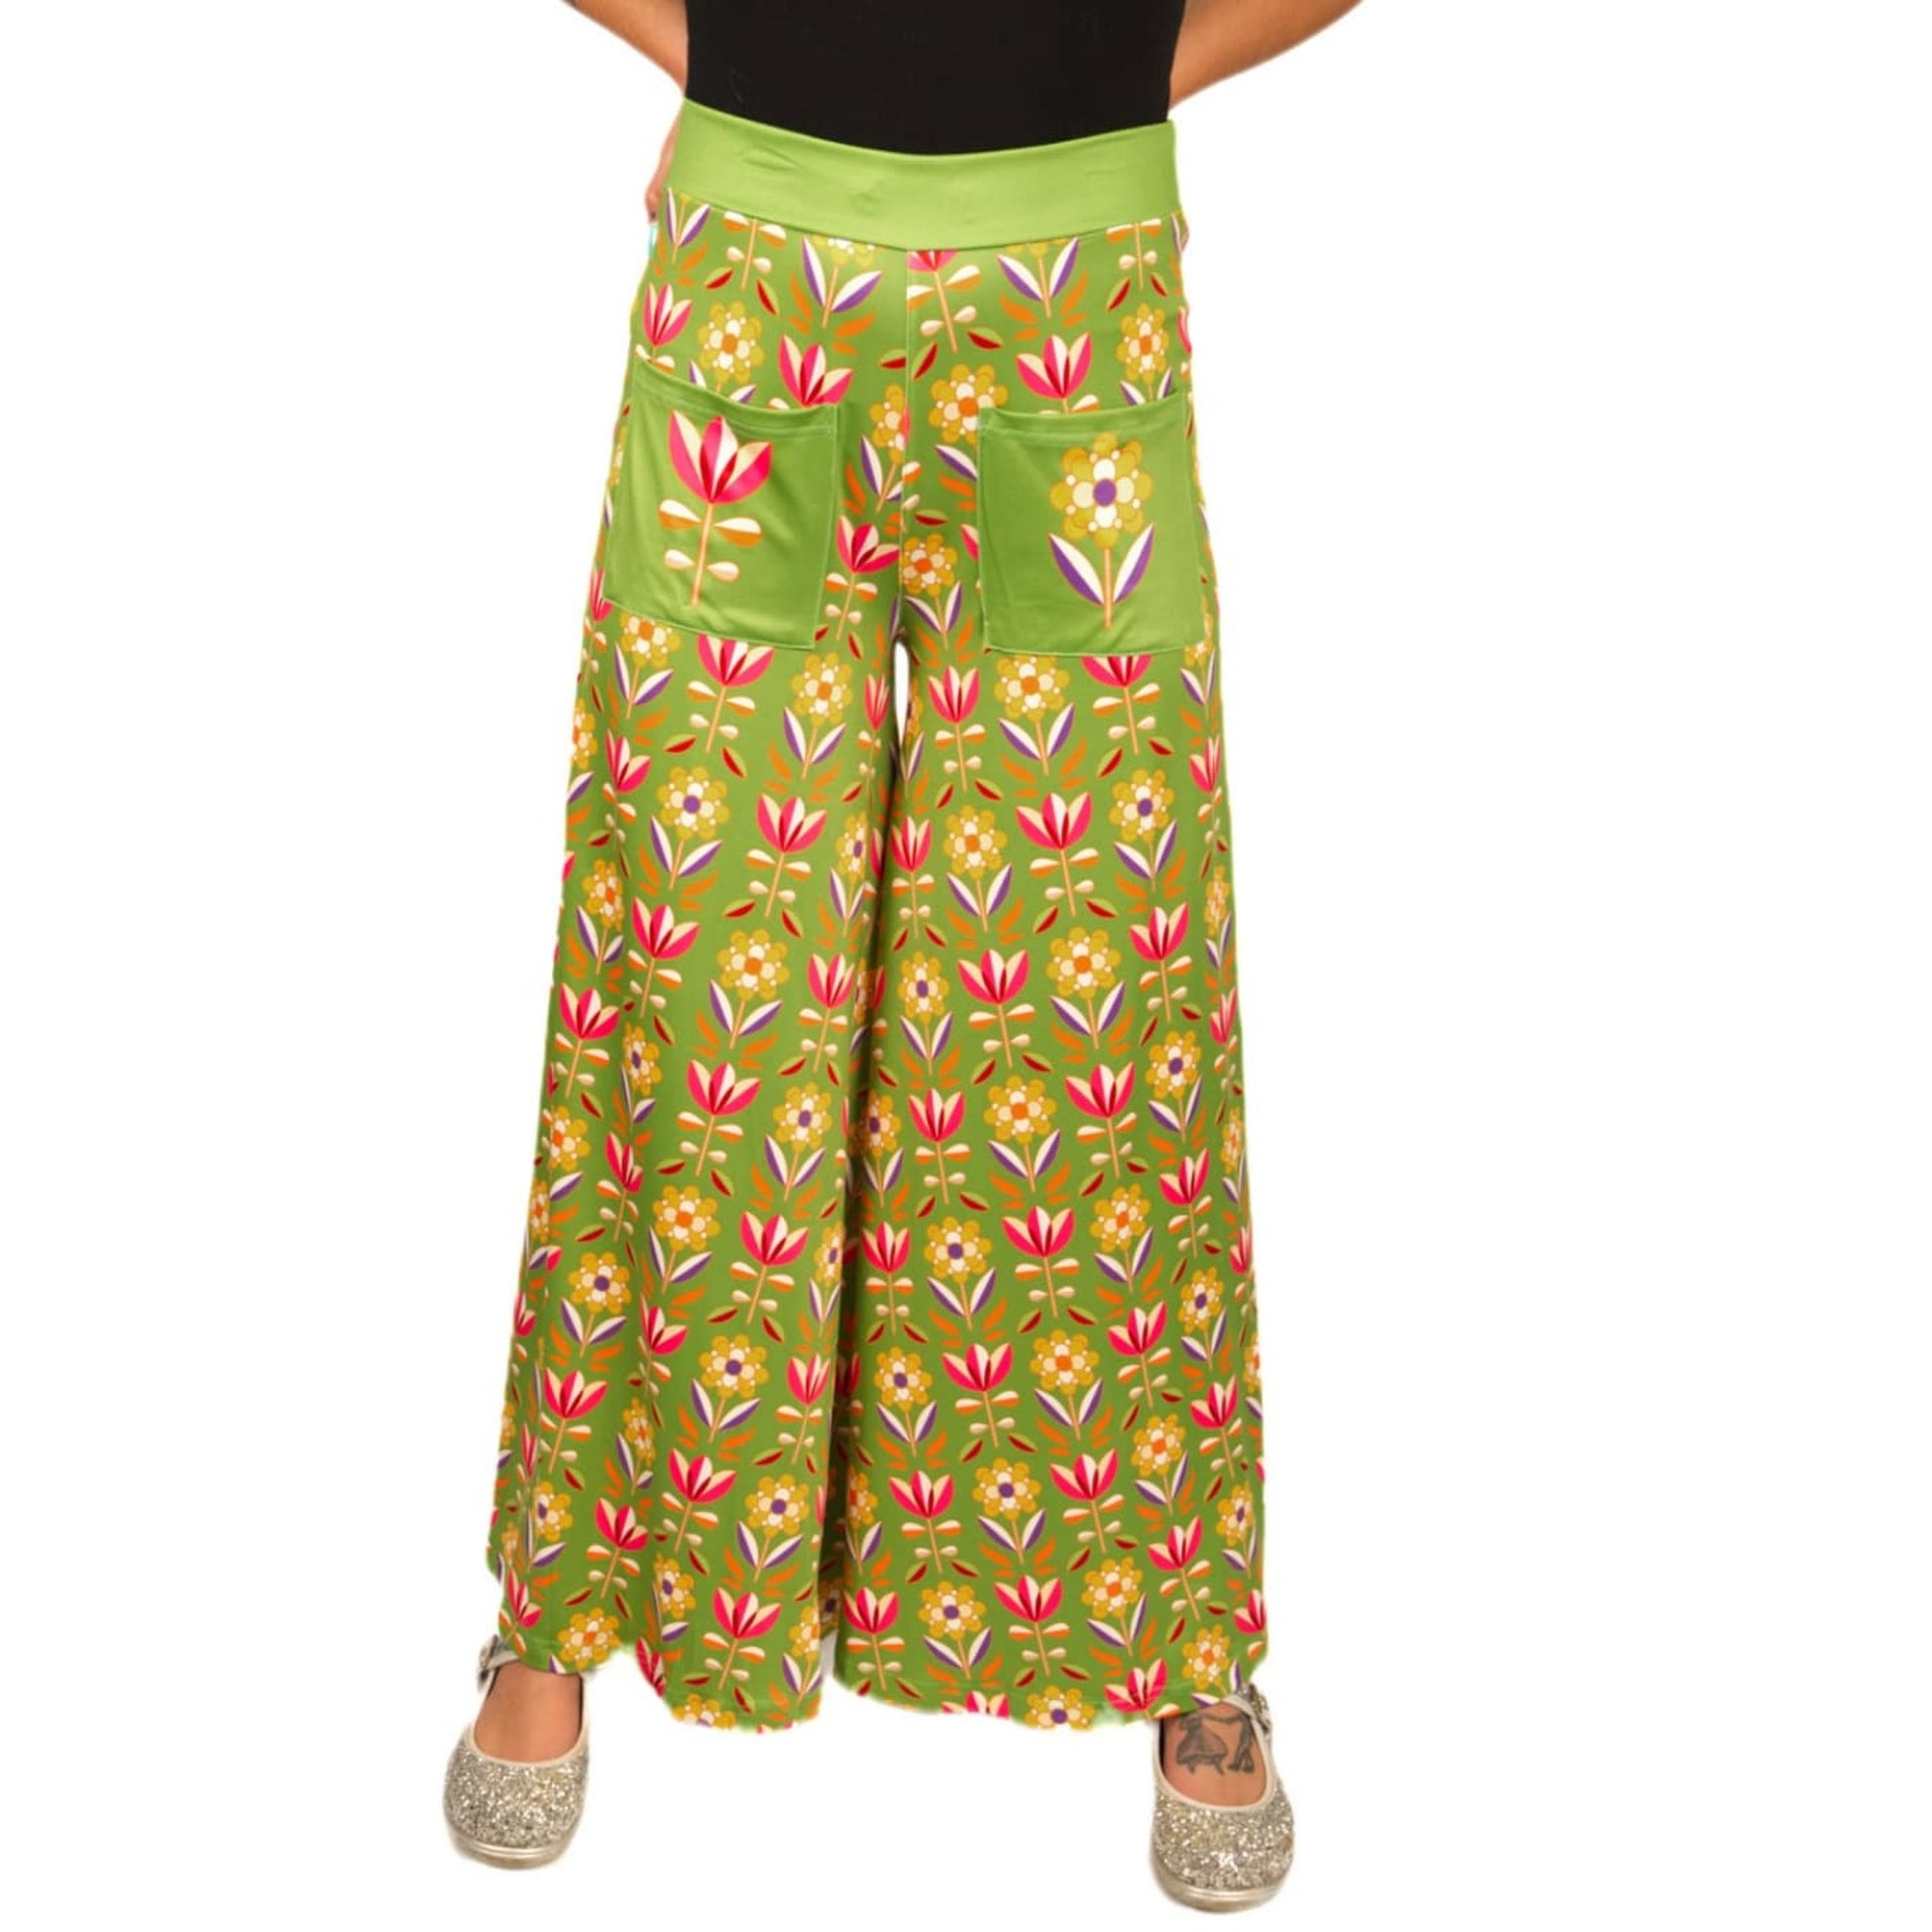 Retro Flower Wide Leg Pants by RainbowsAndFairies.com.au (70s Wallpaper - Psychedelic - Tulip - Pants With Pockets - Vintage Inspired - Flares - Floral) - SKU: CL_WIDEL_RETFL_ORG - Pic-01